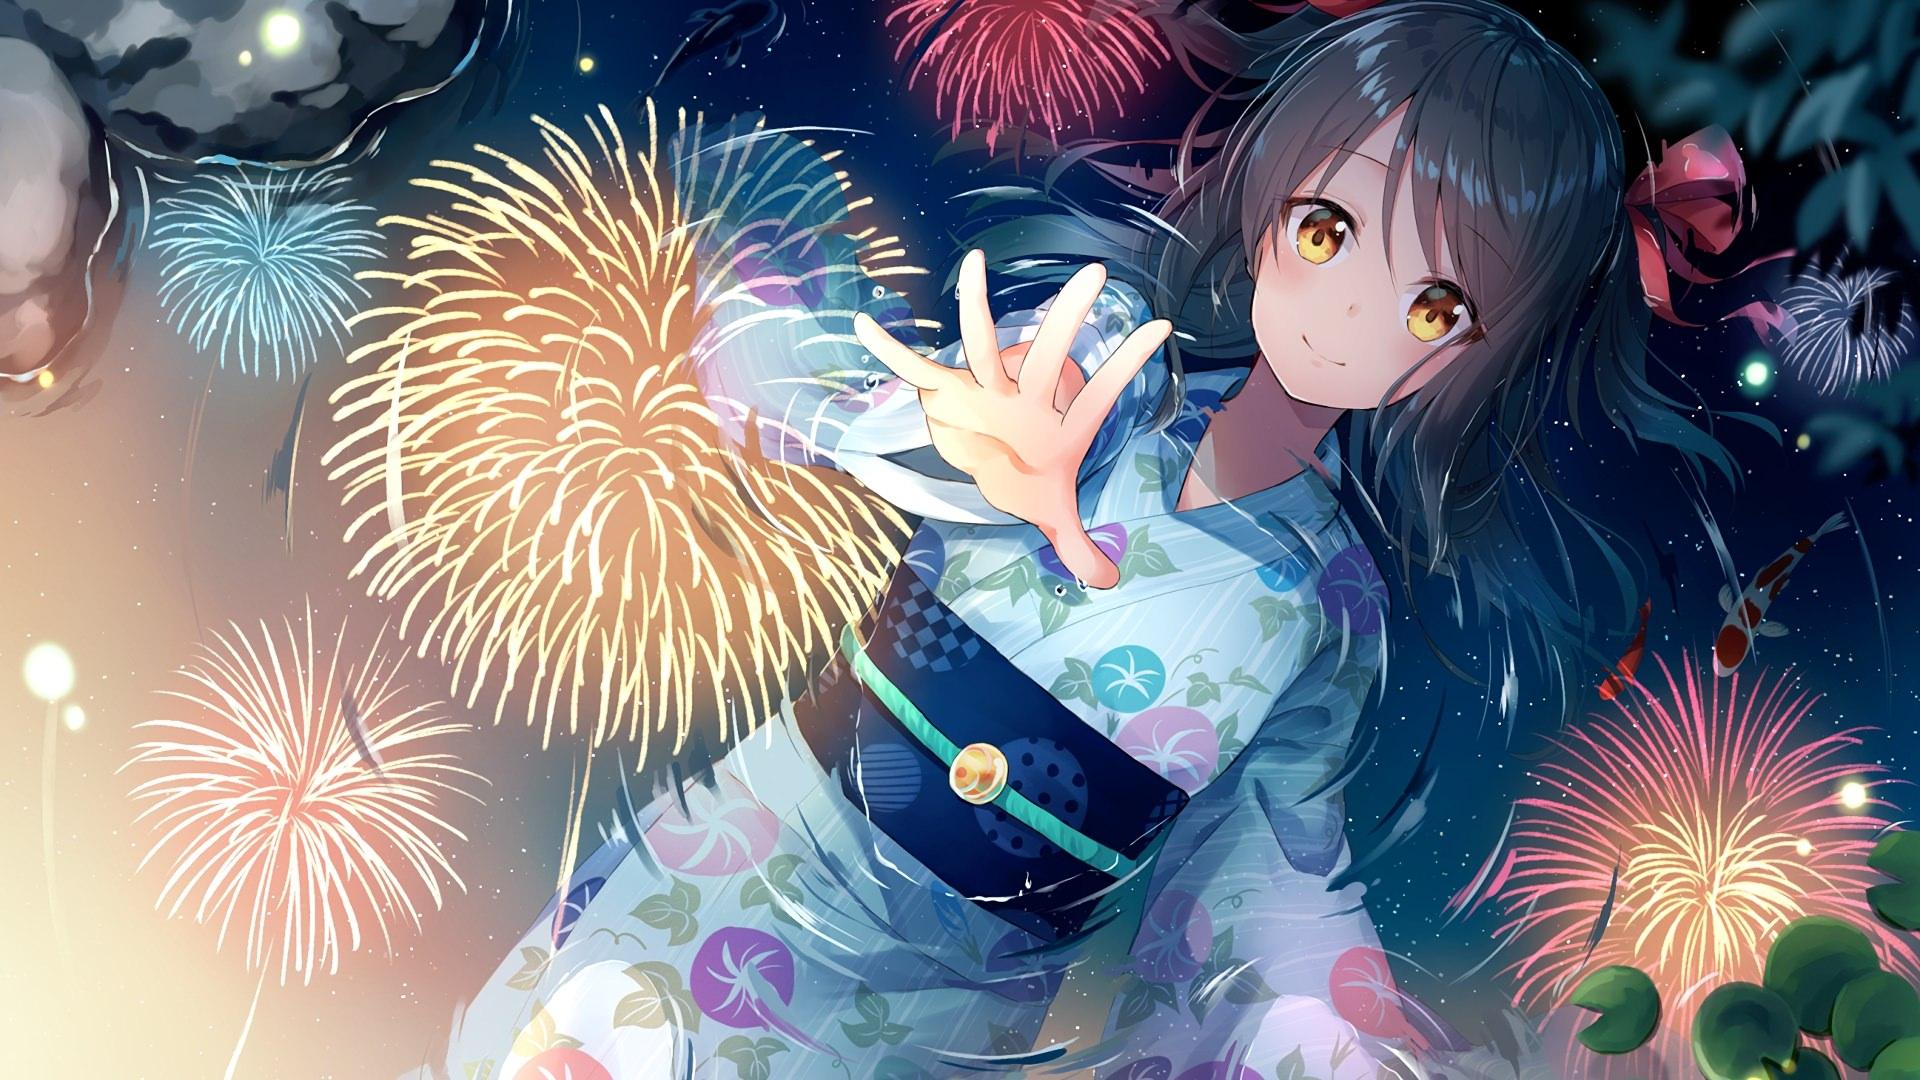 Anime New Year's Day Wallpapers - Wallpaper Cave.